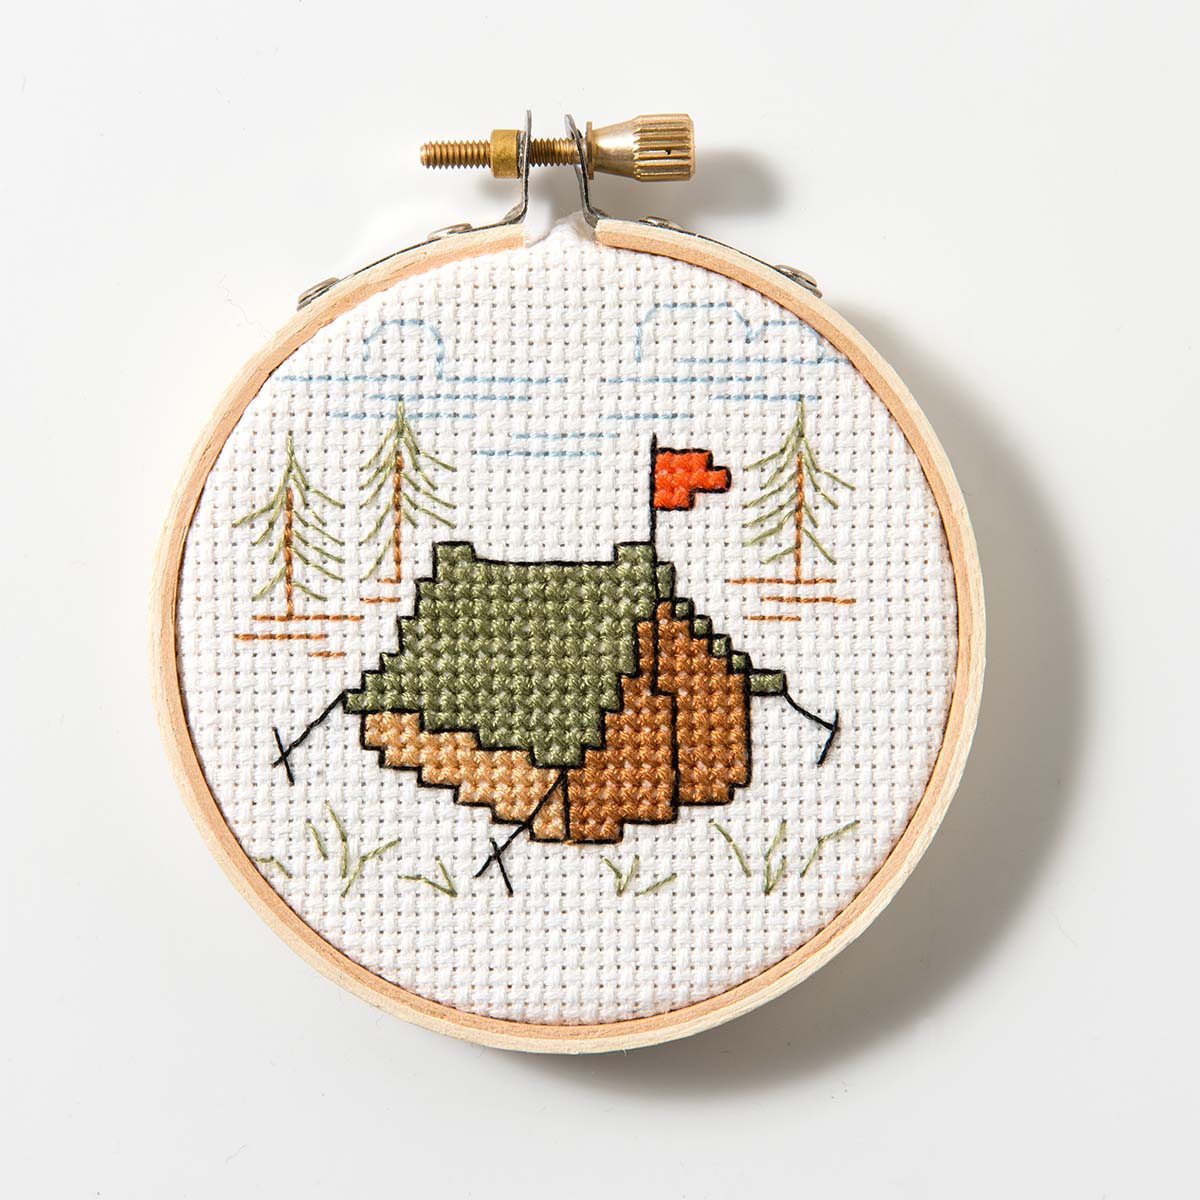 Free Pattern for Cross Stitch - Celebrate National Camping Month